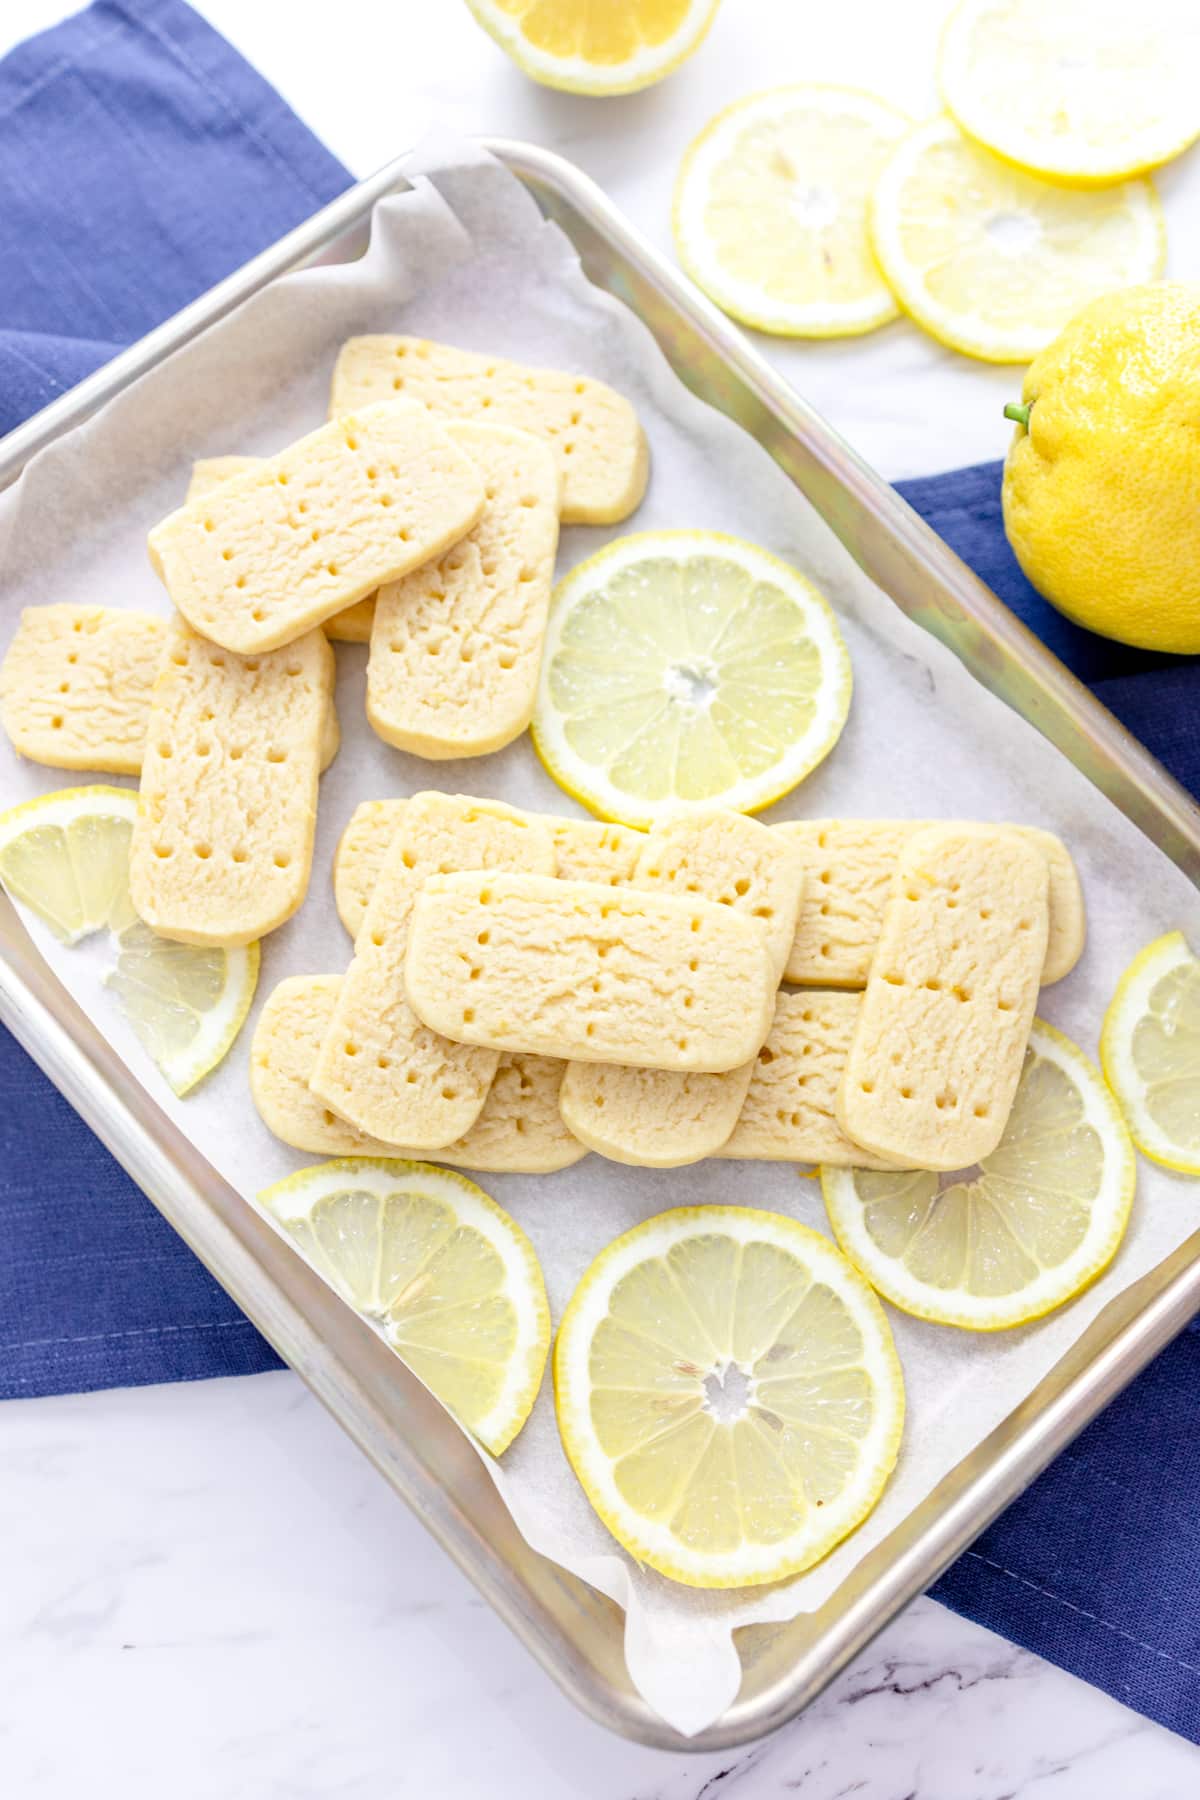 Top view of Lemon Shortbread Cookies on a baking tray surrounded by slices of fresh lemon.